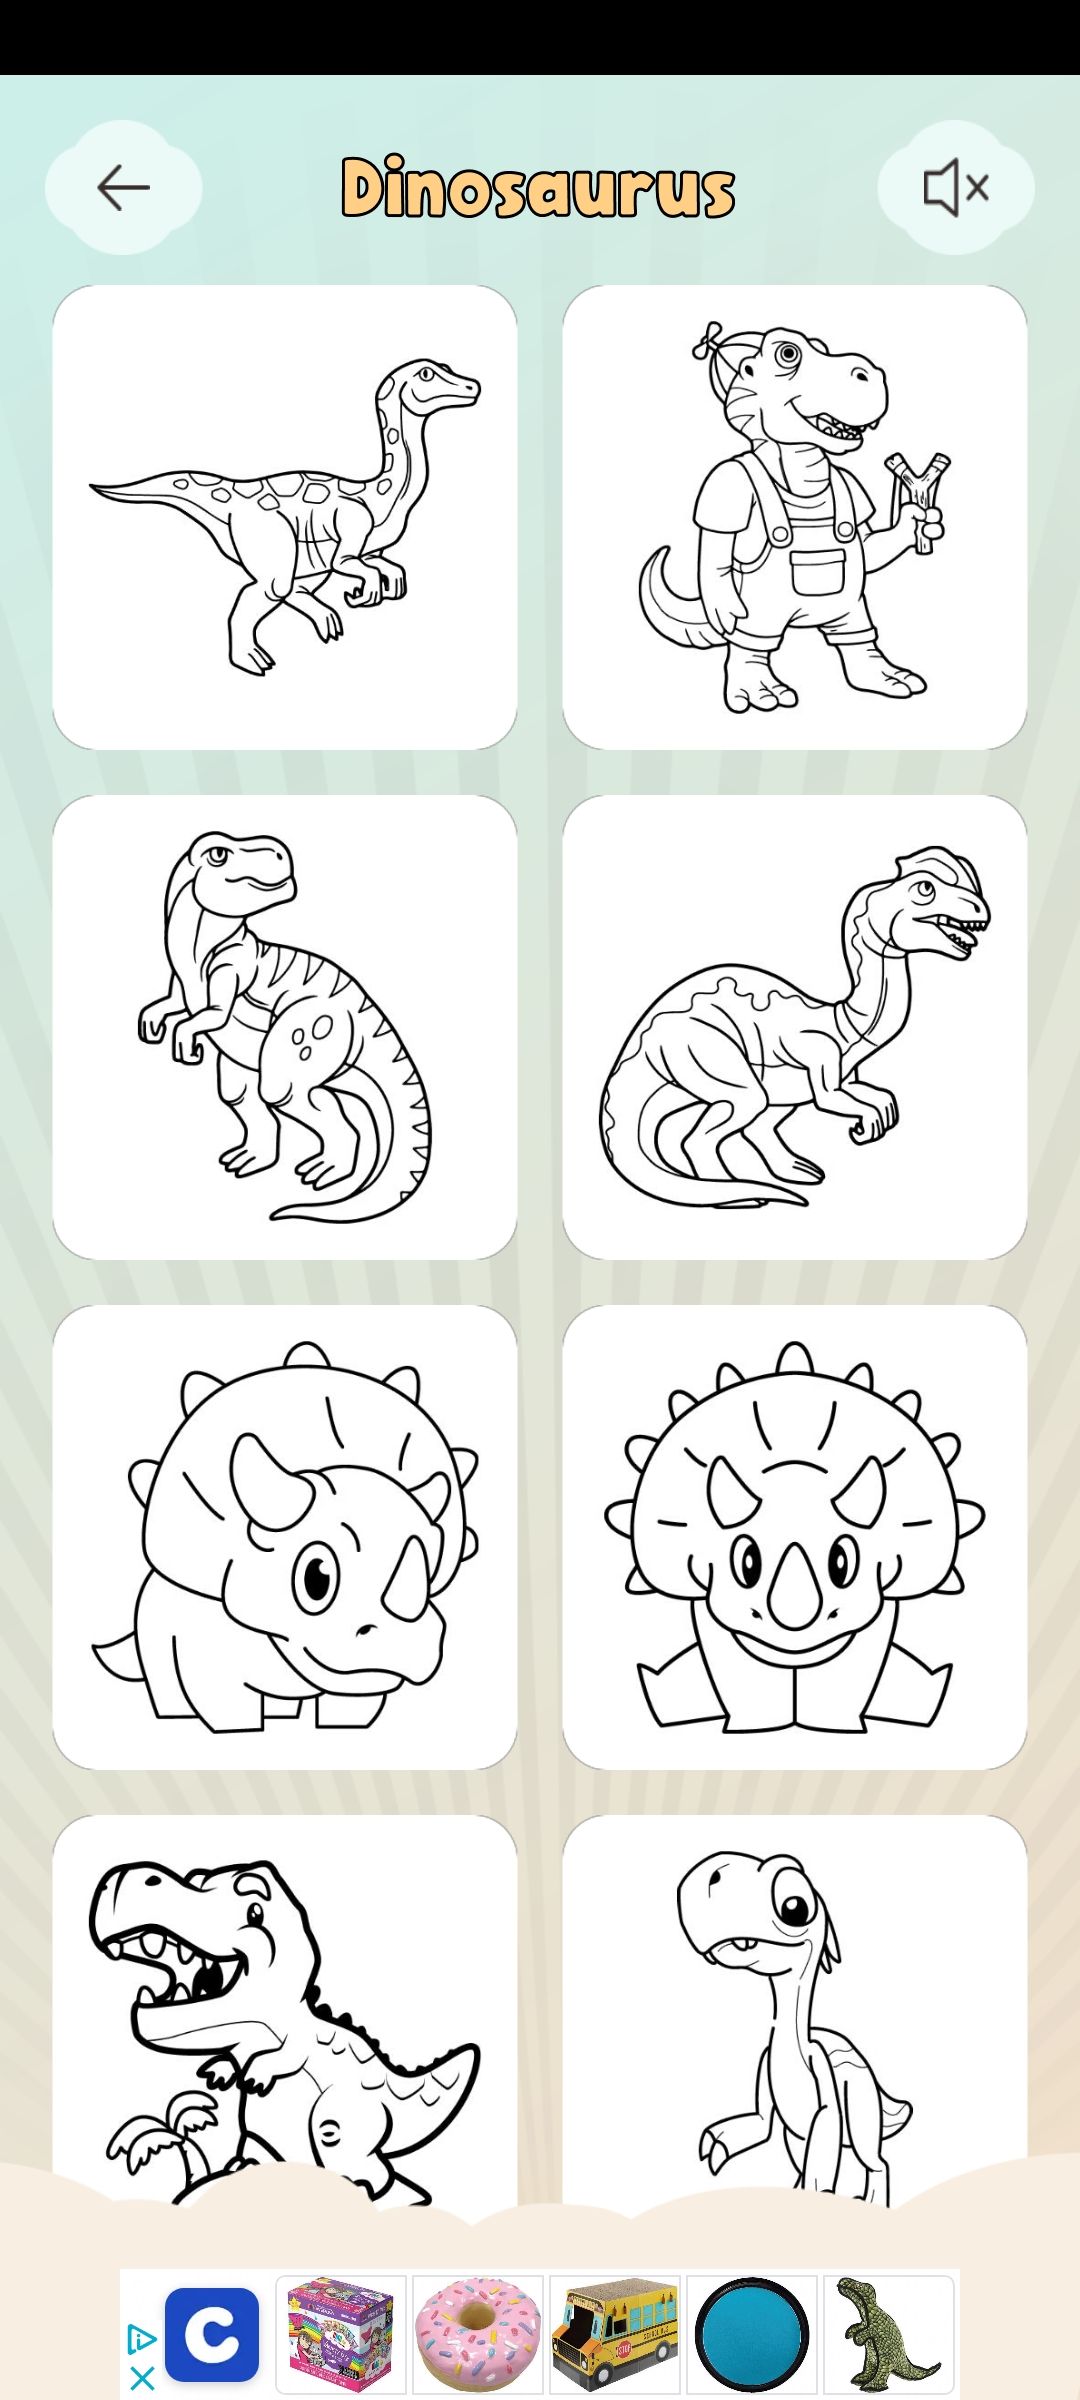 available dinosaur pictures to color in astralwire studio app